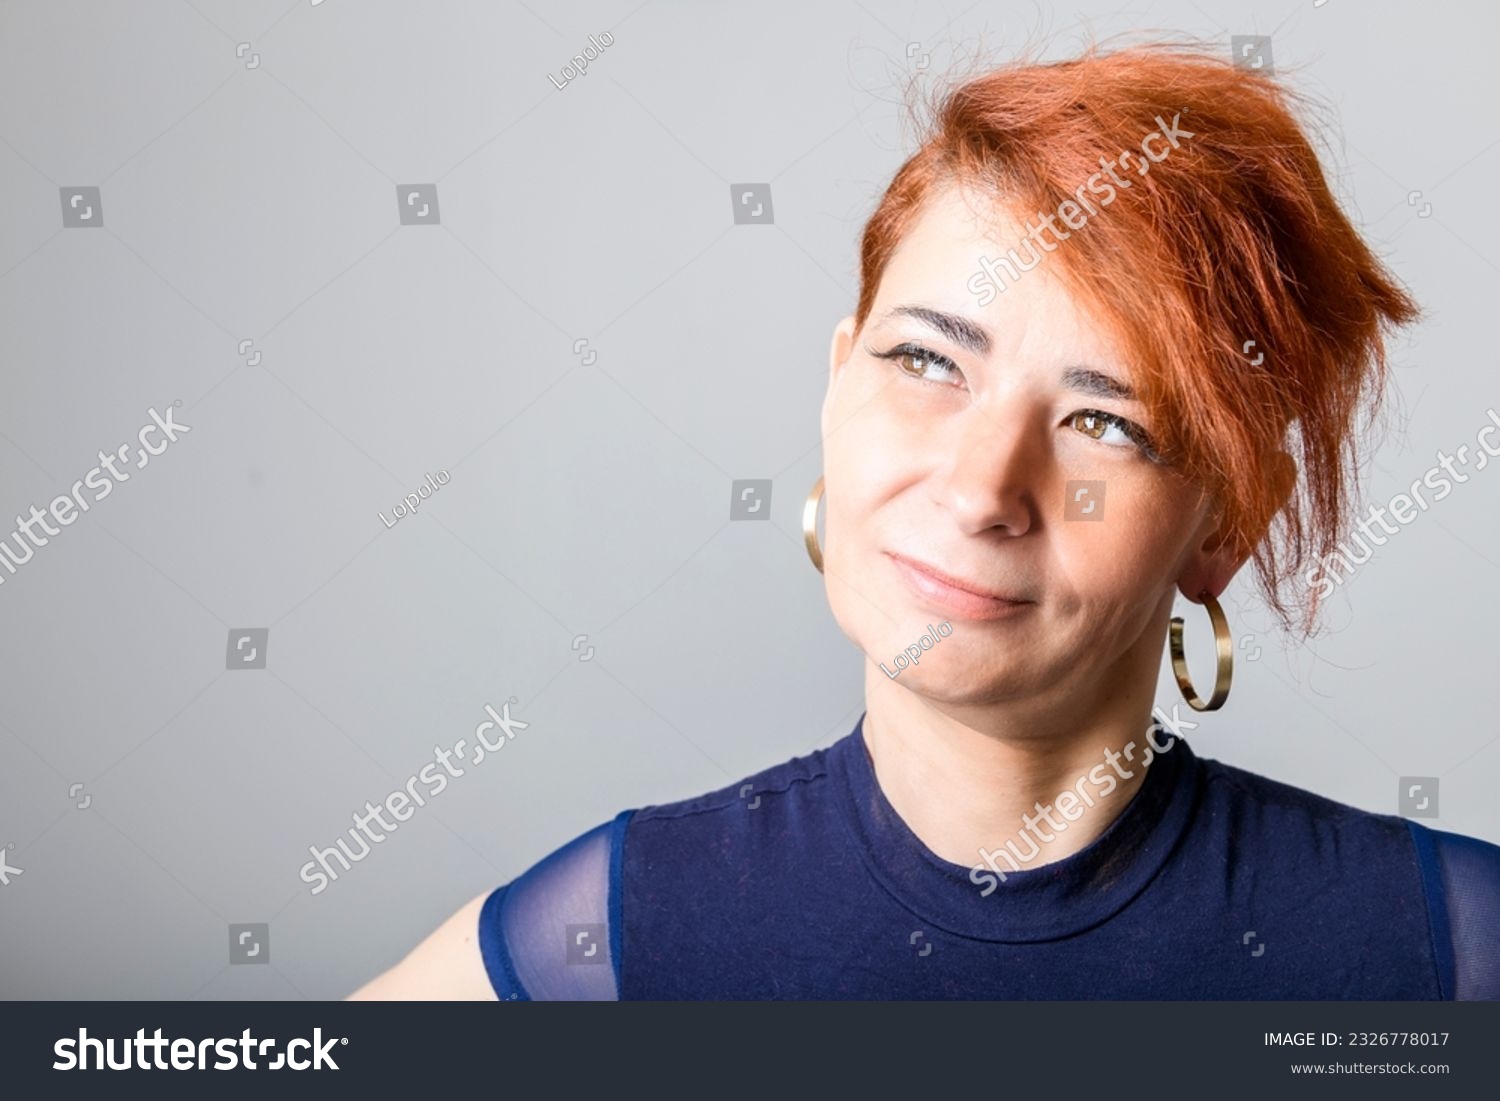 A Portrait of a mature woman on studio background #2326778017